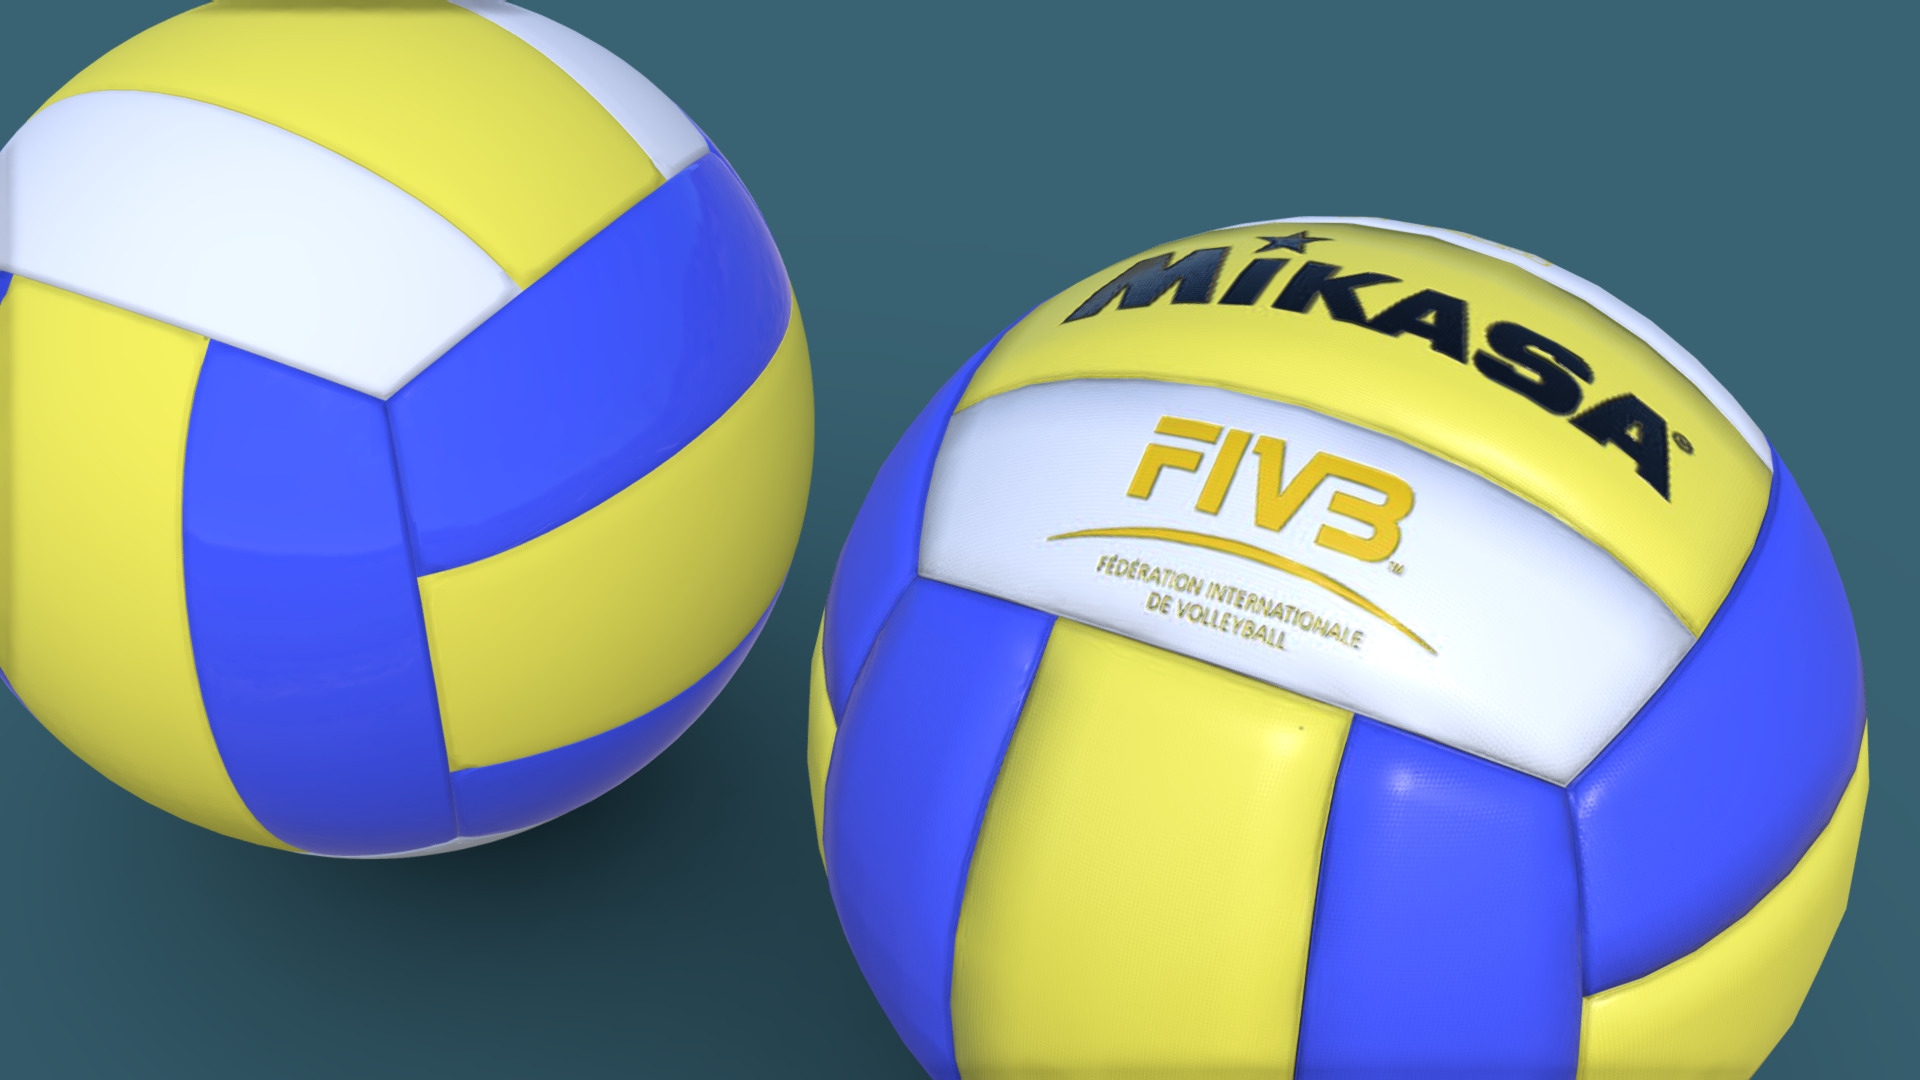 3D model Mikasa MG MV210 Ball - This is a 3D model of the Mikasa MG MV210 Ball. The 3D model is about logo.